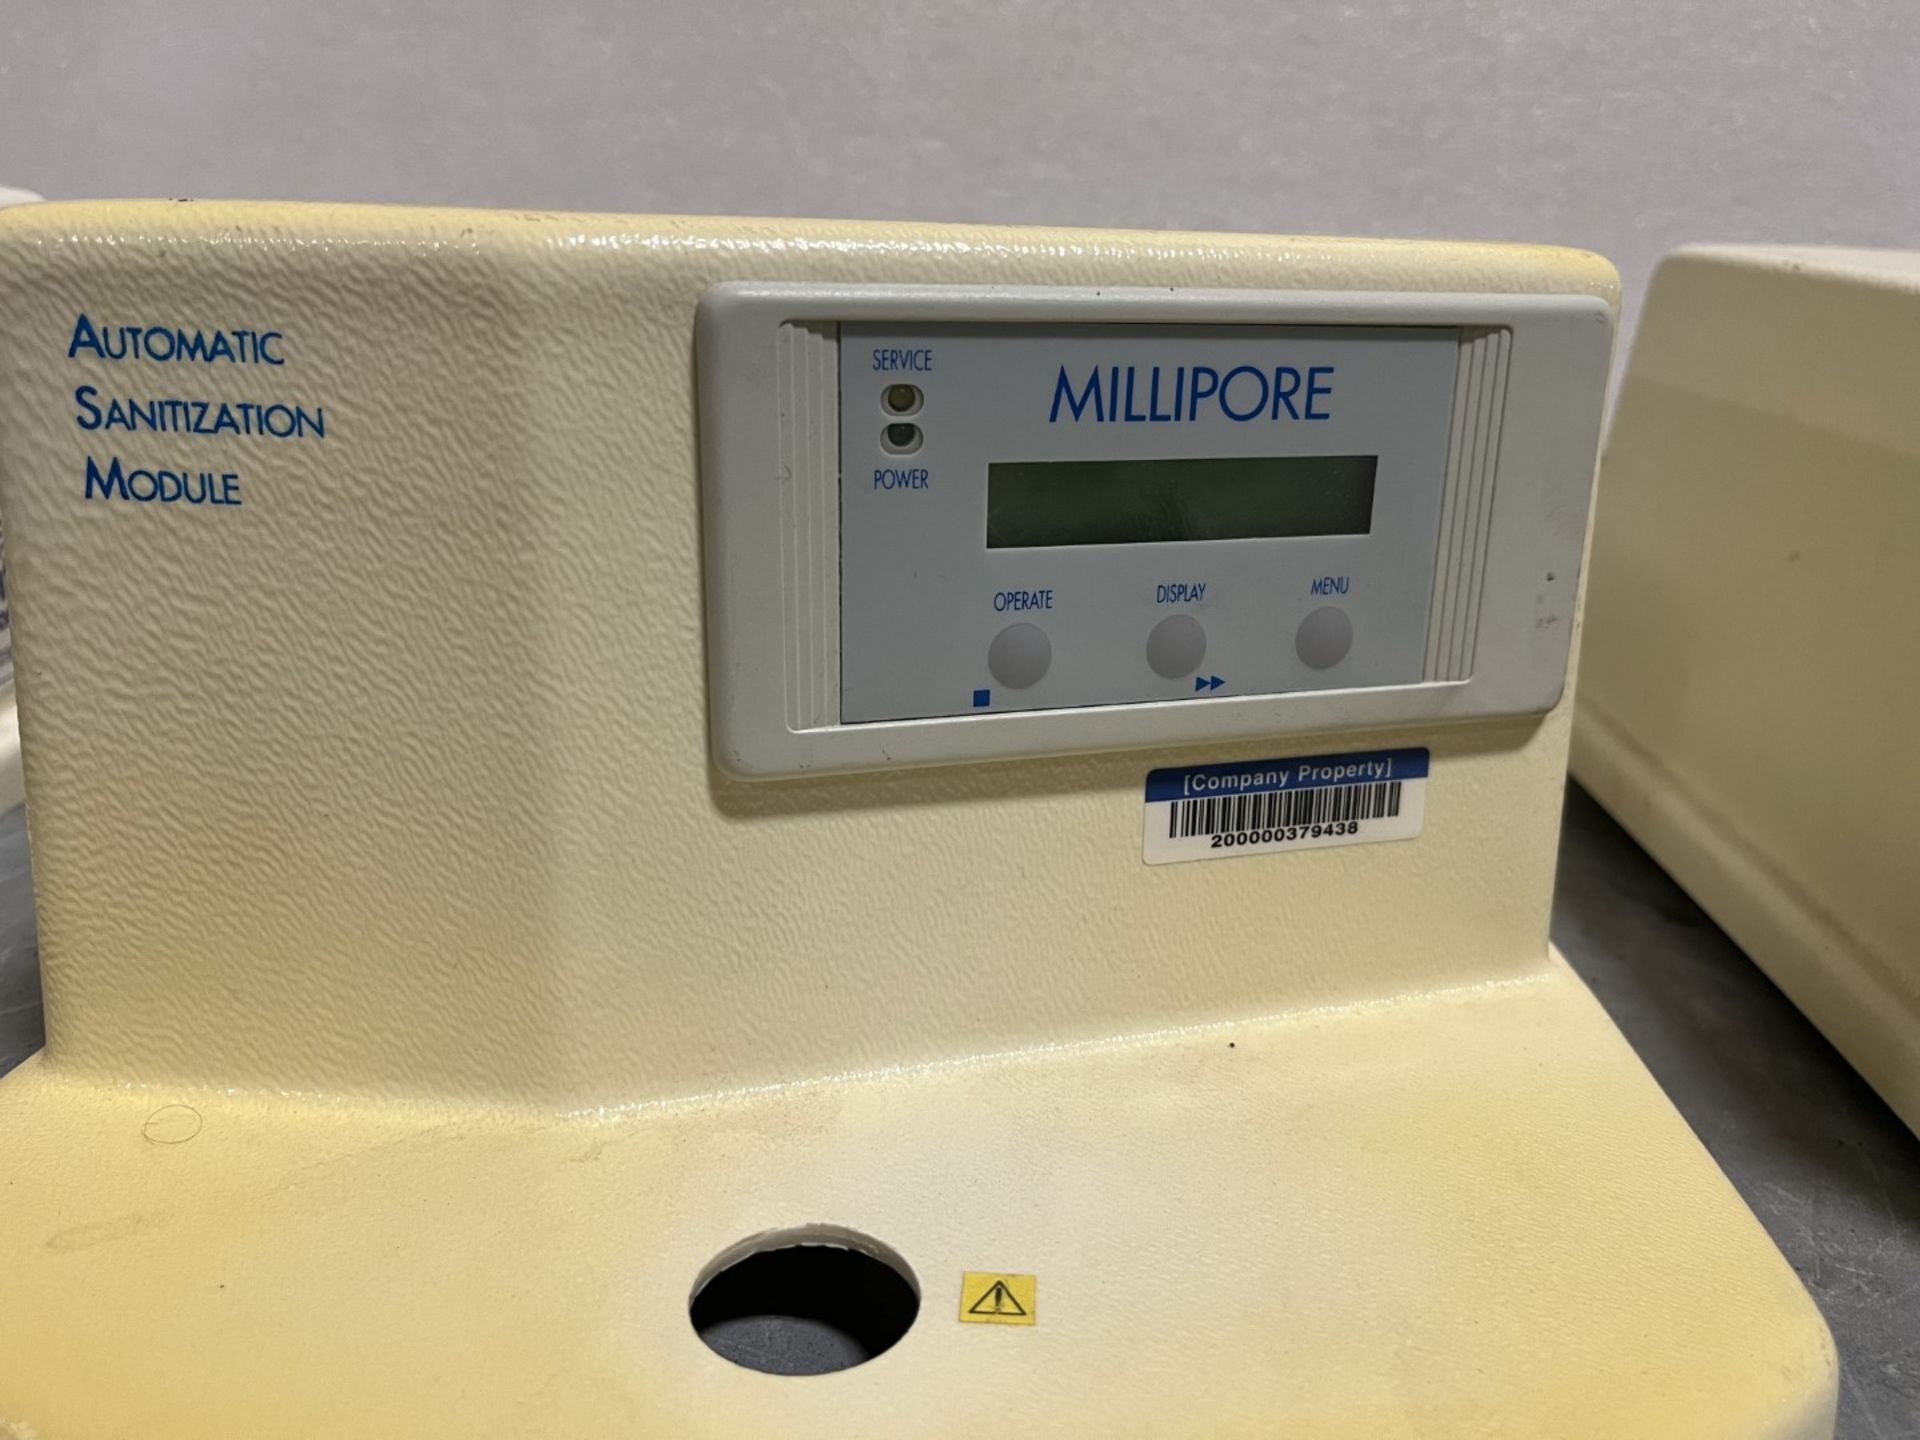 Lot of (3) Millipore Automatic Sanitization Module, Cat# TANKS6LUV - Image 4 of 7